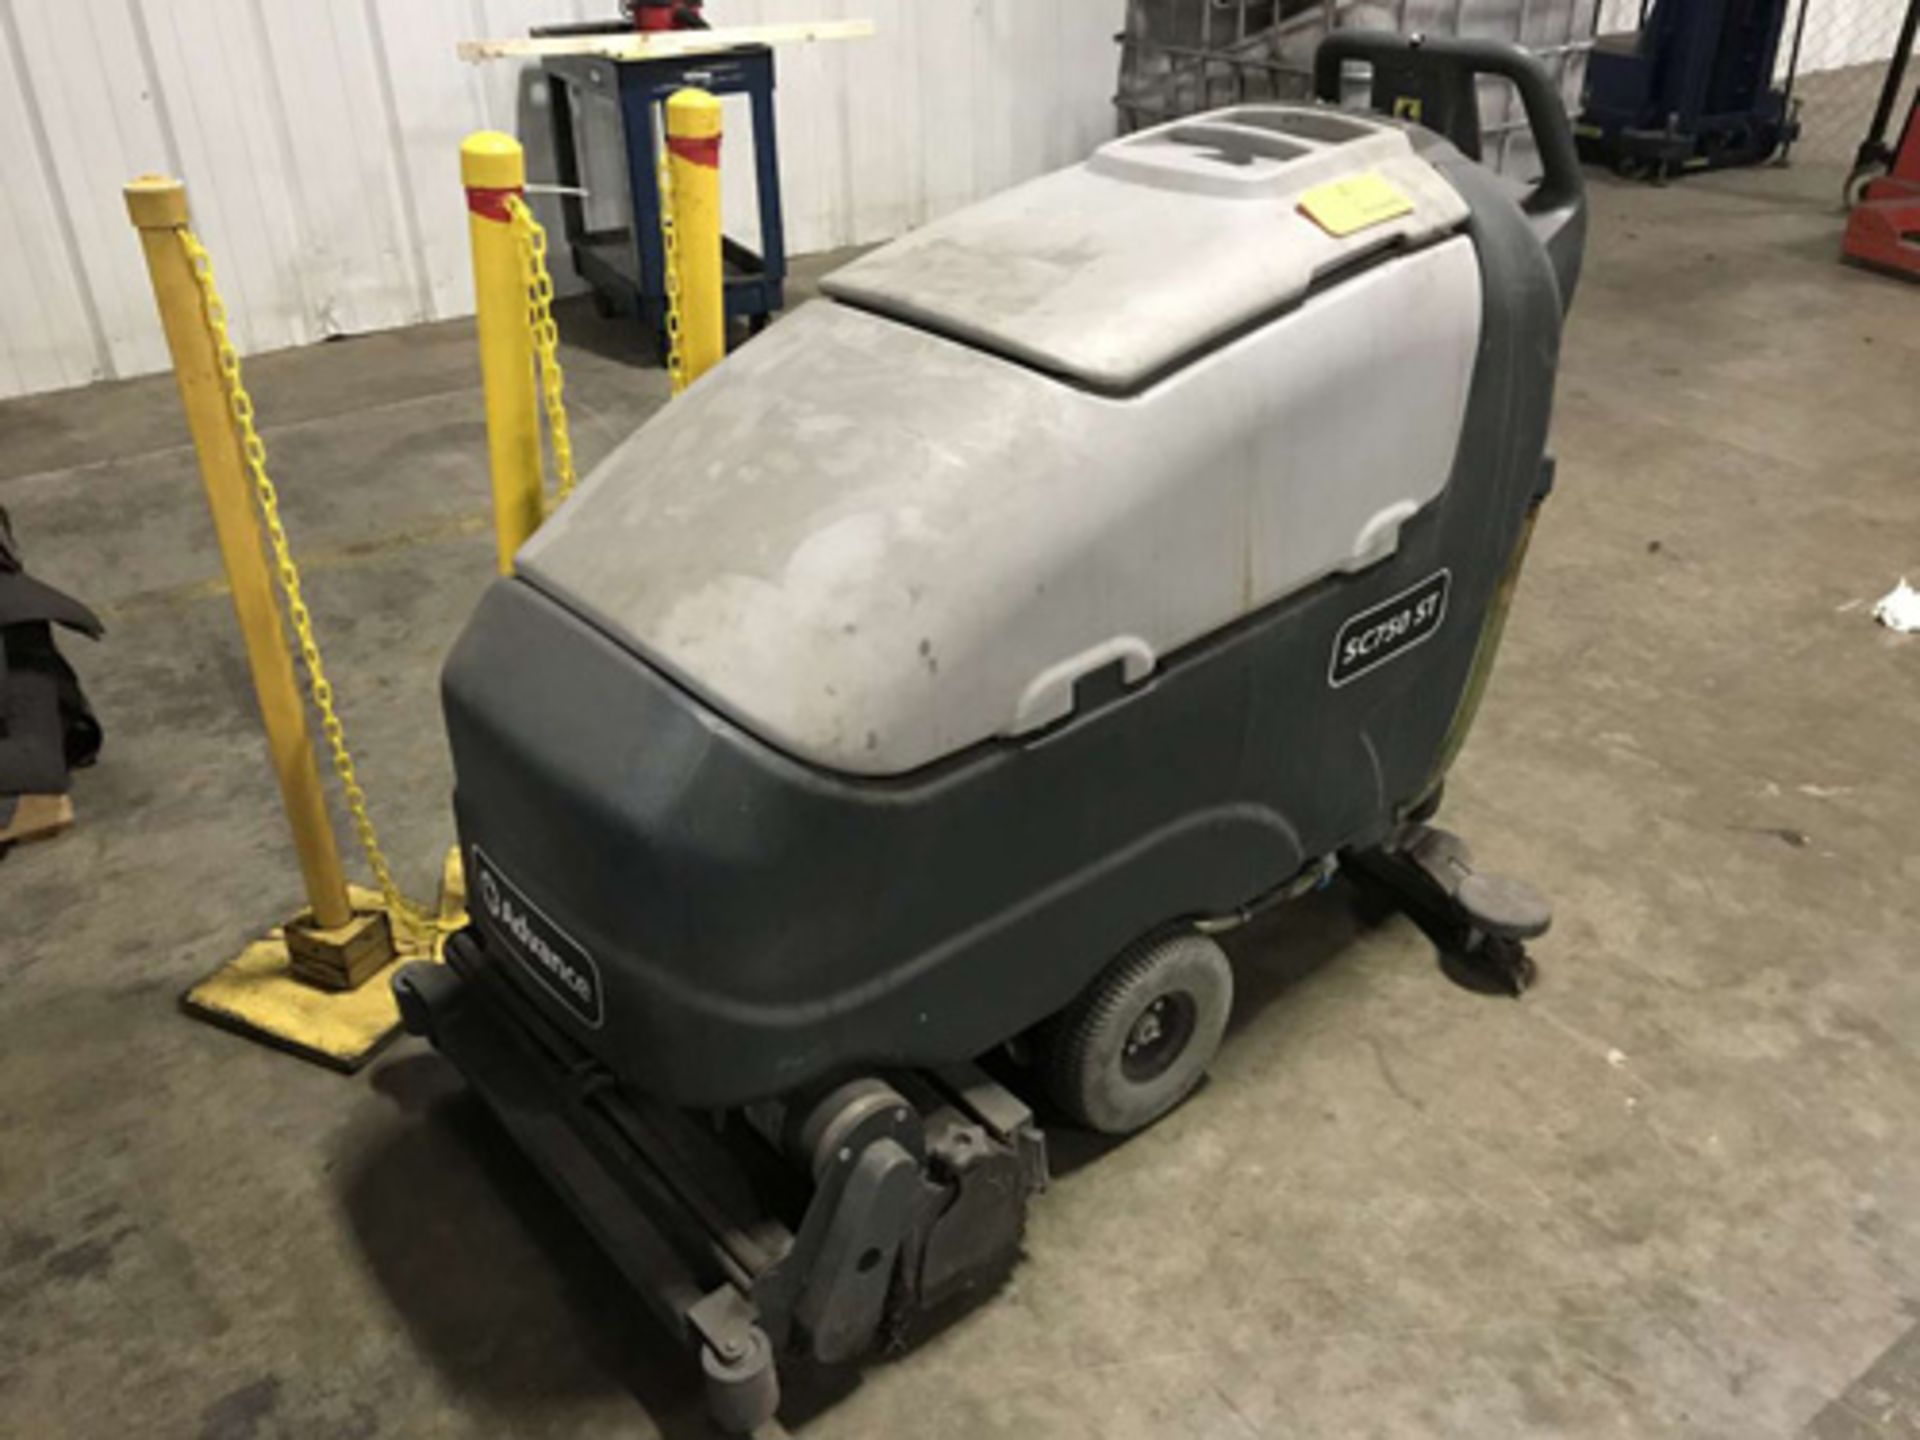 26" Advance SC750ST-28C Industrial Floor Scrubber Electric W Charger - Located In: Huntington - Image 2 of 4